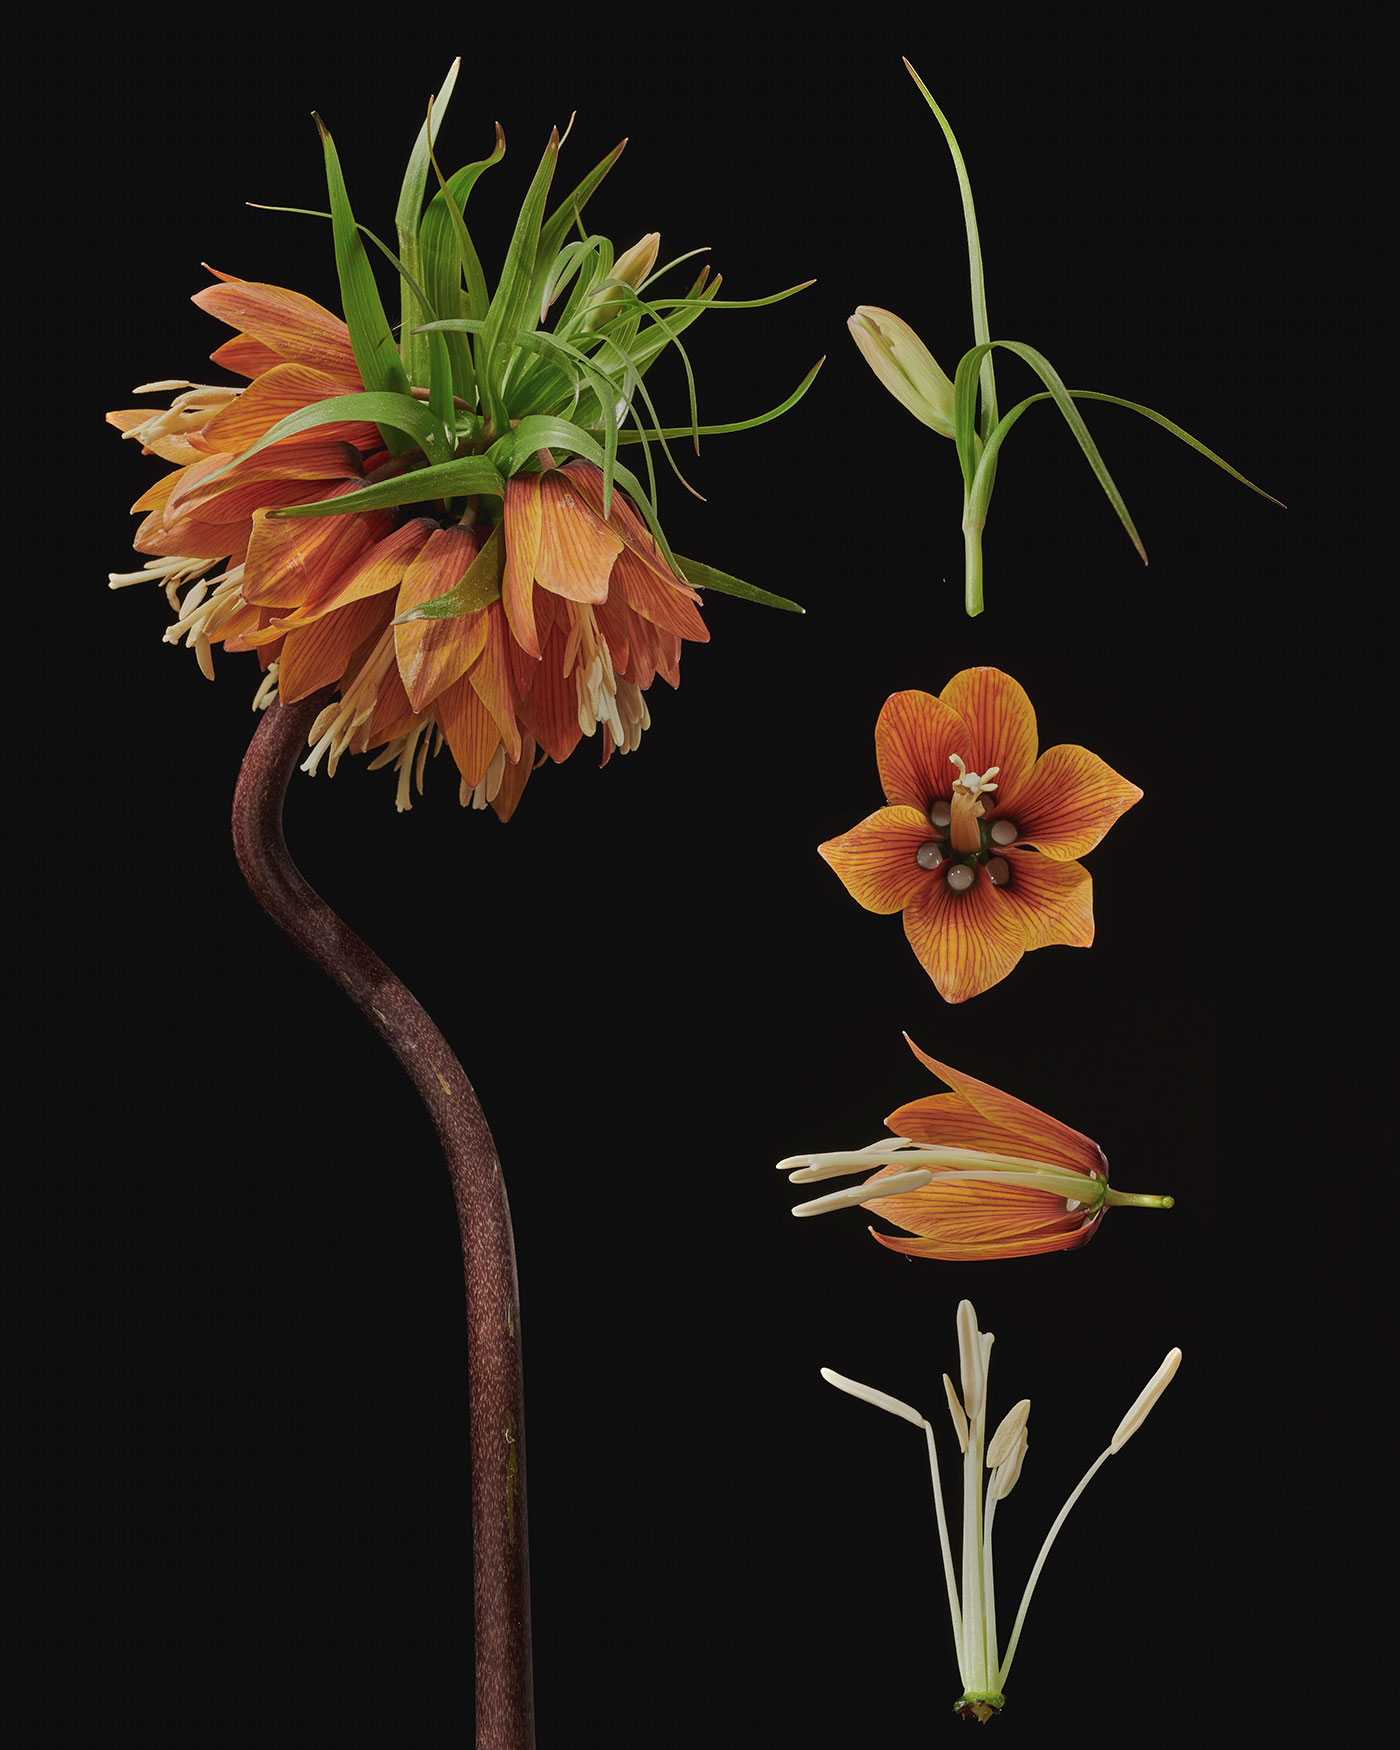 Dissecting Flowers by Tim van der Most